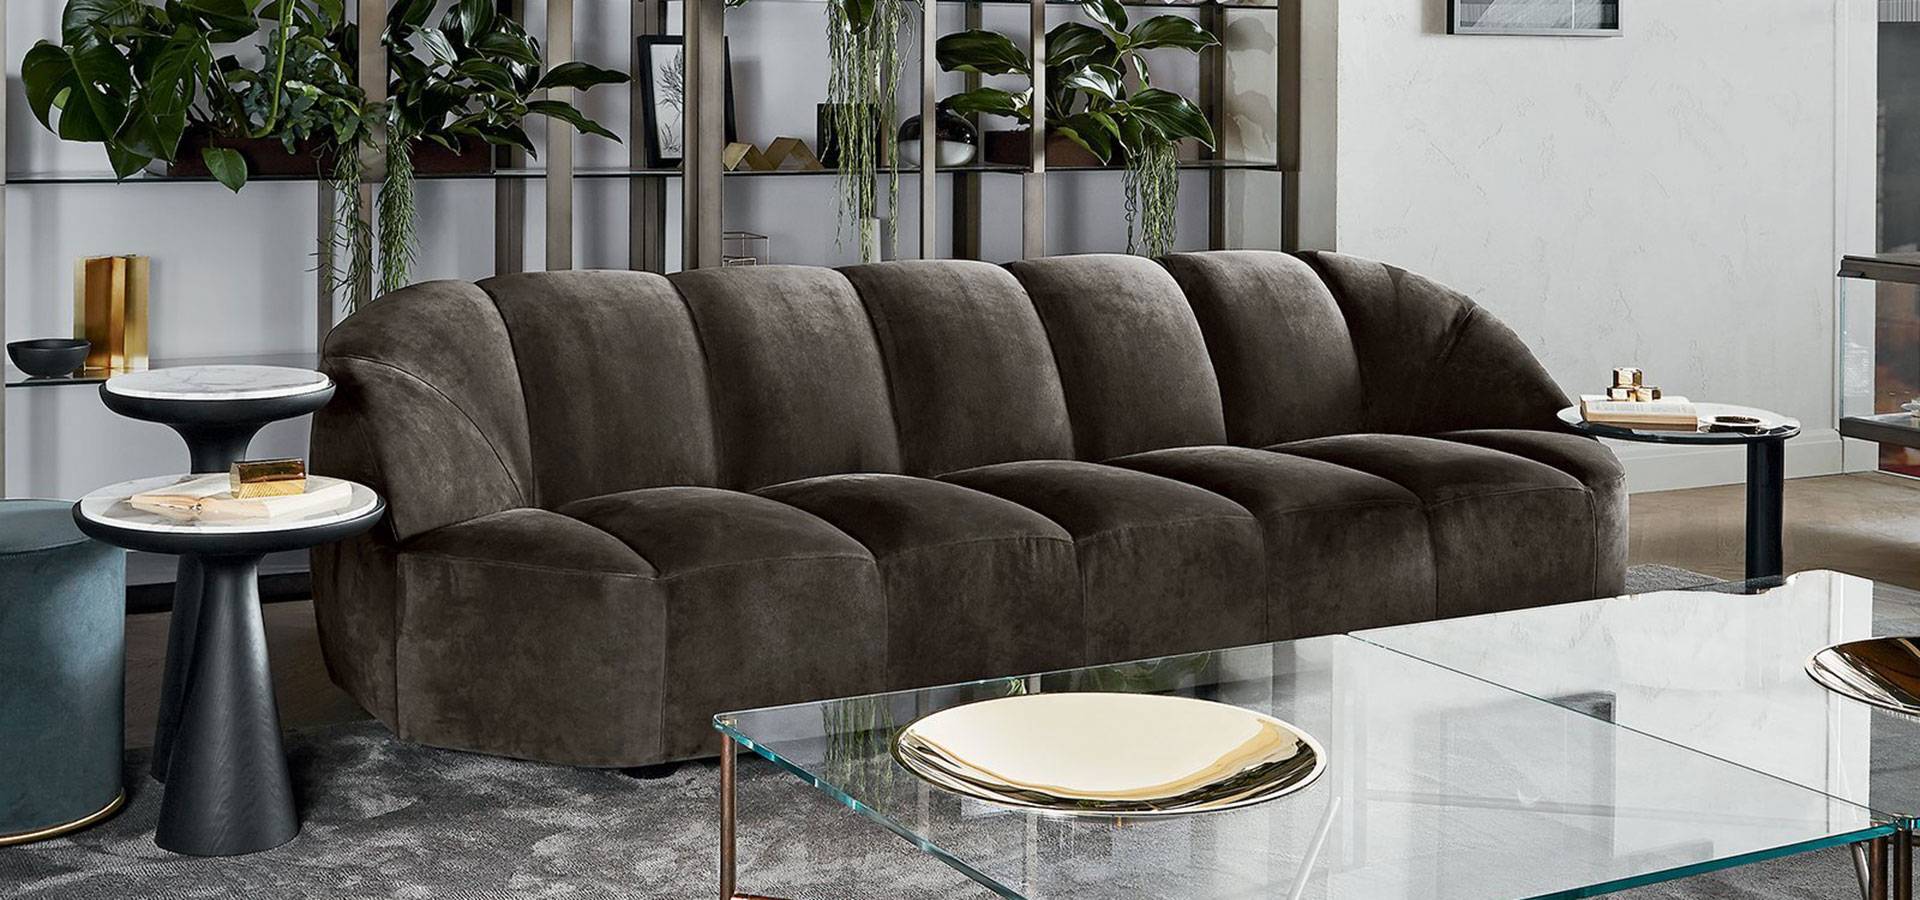 Gallotti And Radice Sofas Grey Leather Exclusive By Andreotti